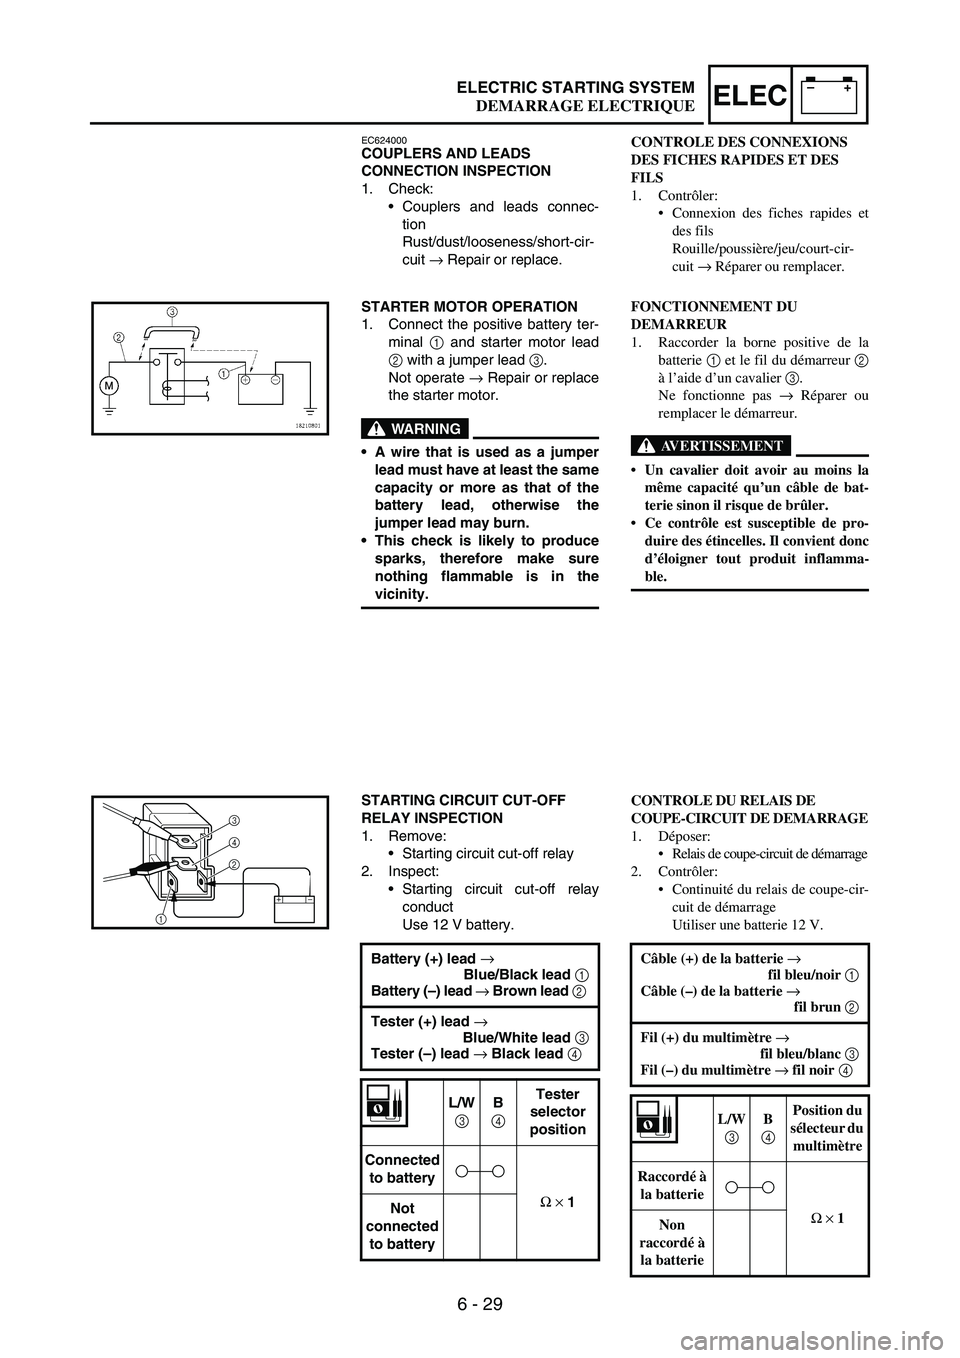 YAMAHA WR 250F 2005  Notices Demploi (in French) 6 - 29
–+ELECELECTRIC STARTING SYSTEM
EC624000COUPLERS AND LEADS 
CONNECTION INSPECTION
1. Check:
Couplers and leads connec-
tion 
Rust/dust/looseness/short-cir-
cuit 
→ Repair or replace.
STARTE